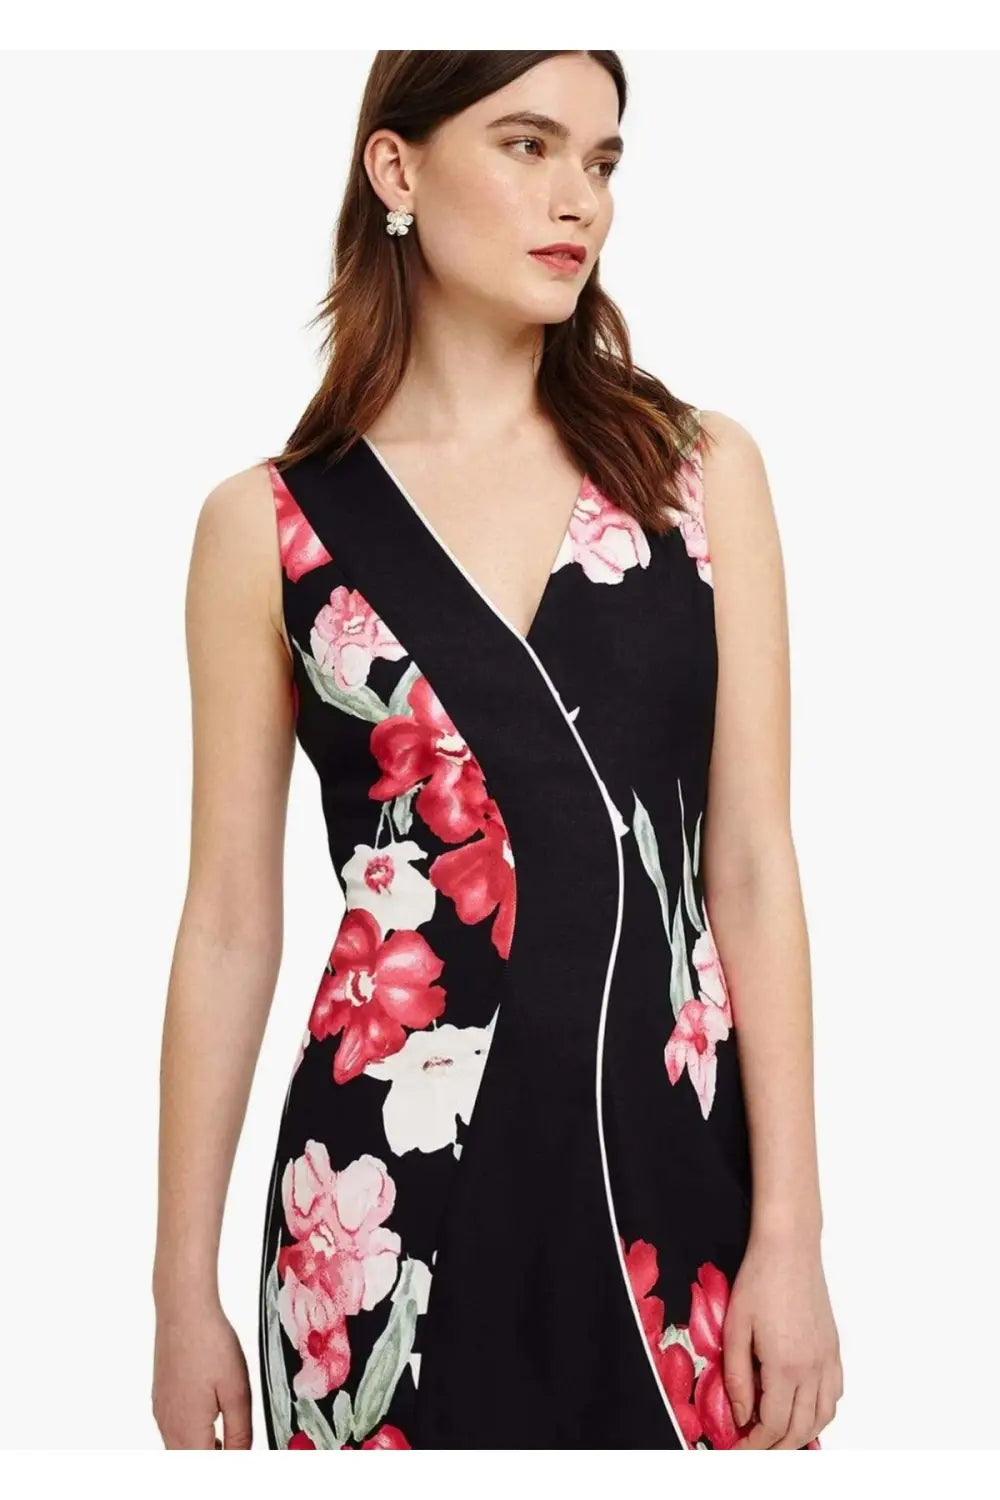 Phase Eight Floral Pencil Dress